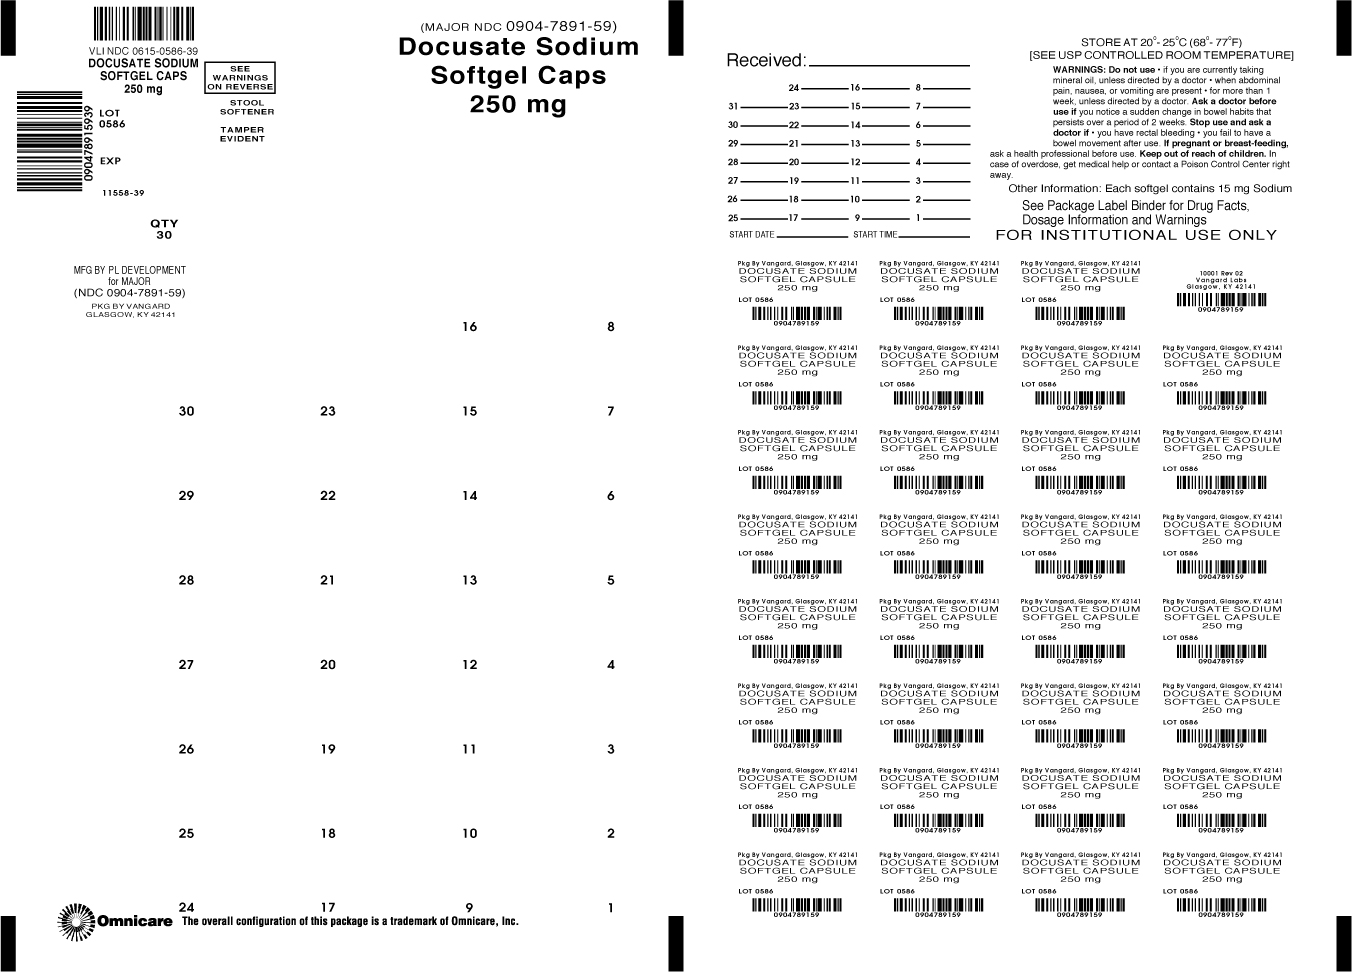 docusate-sodium-by-ncs-healthcare-of-ky-inc-dba-vangard-labs-docusate-sodium-capsule